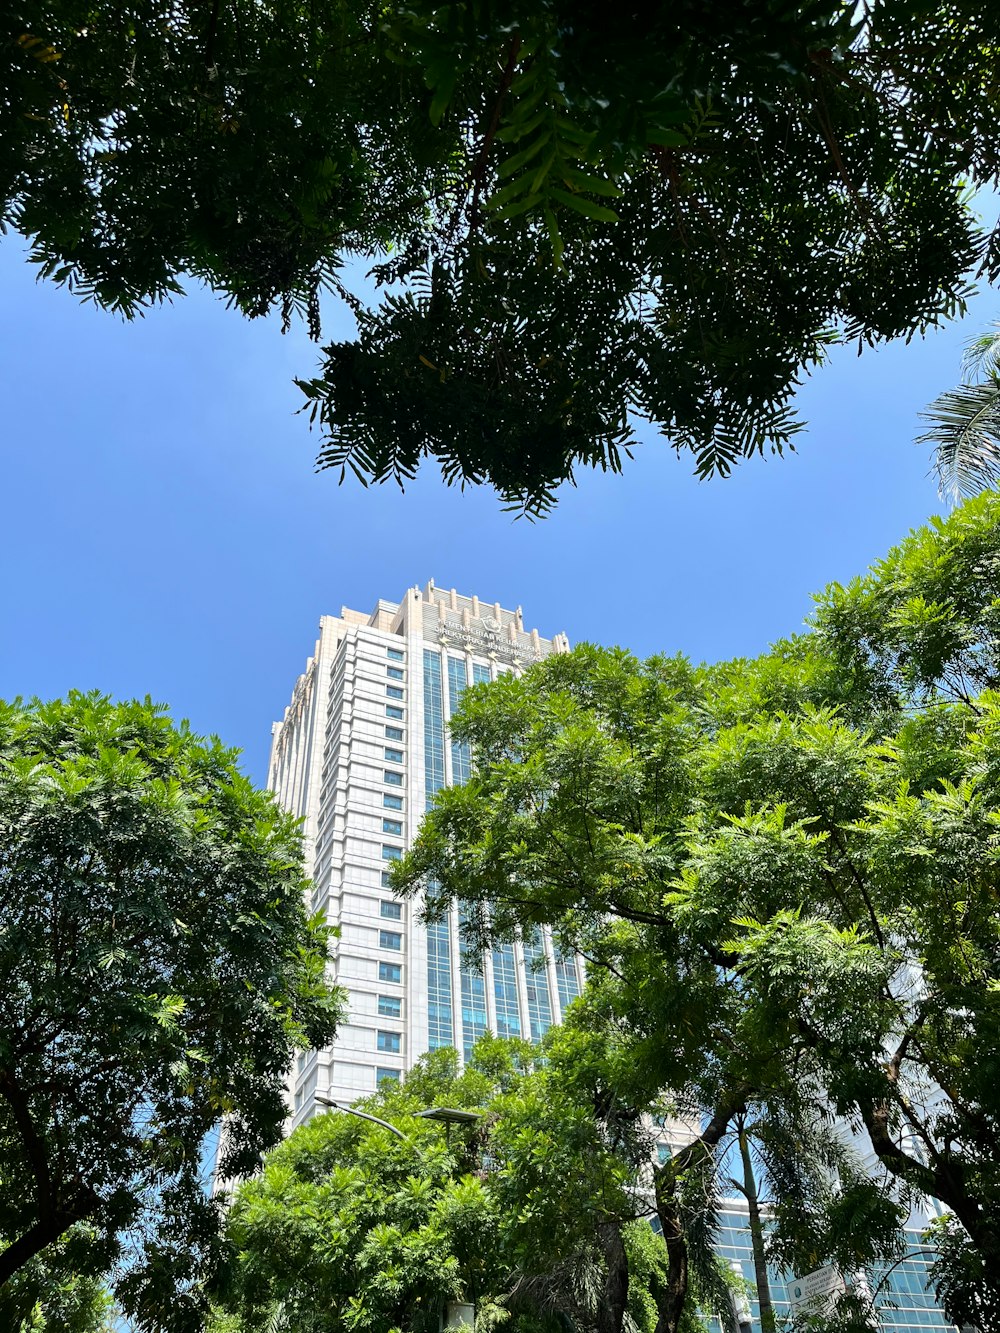 a tall building surrounded by trees and a blue sky